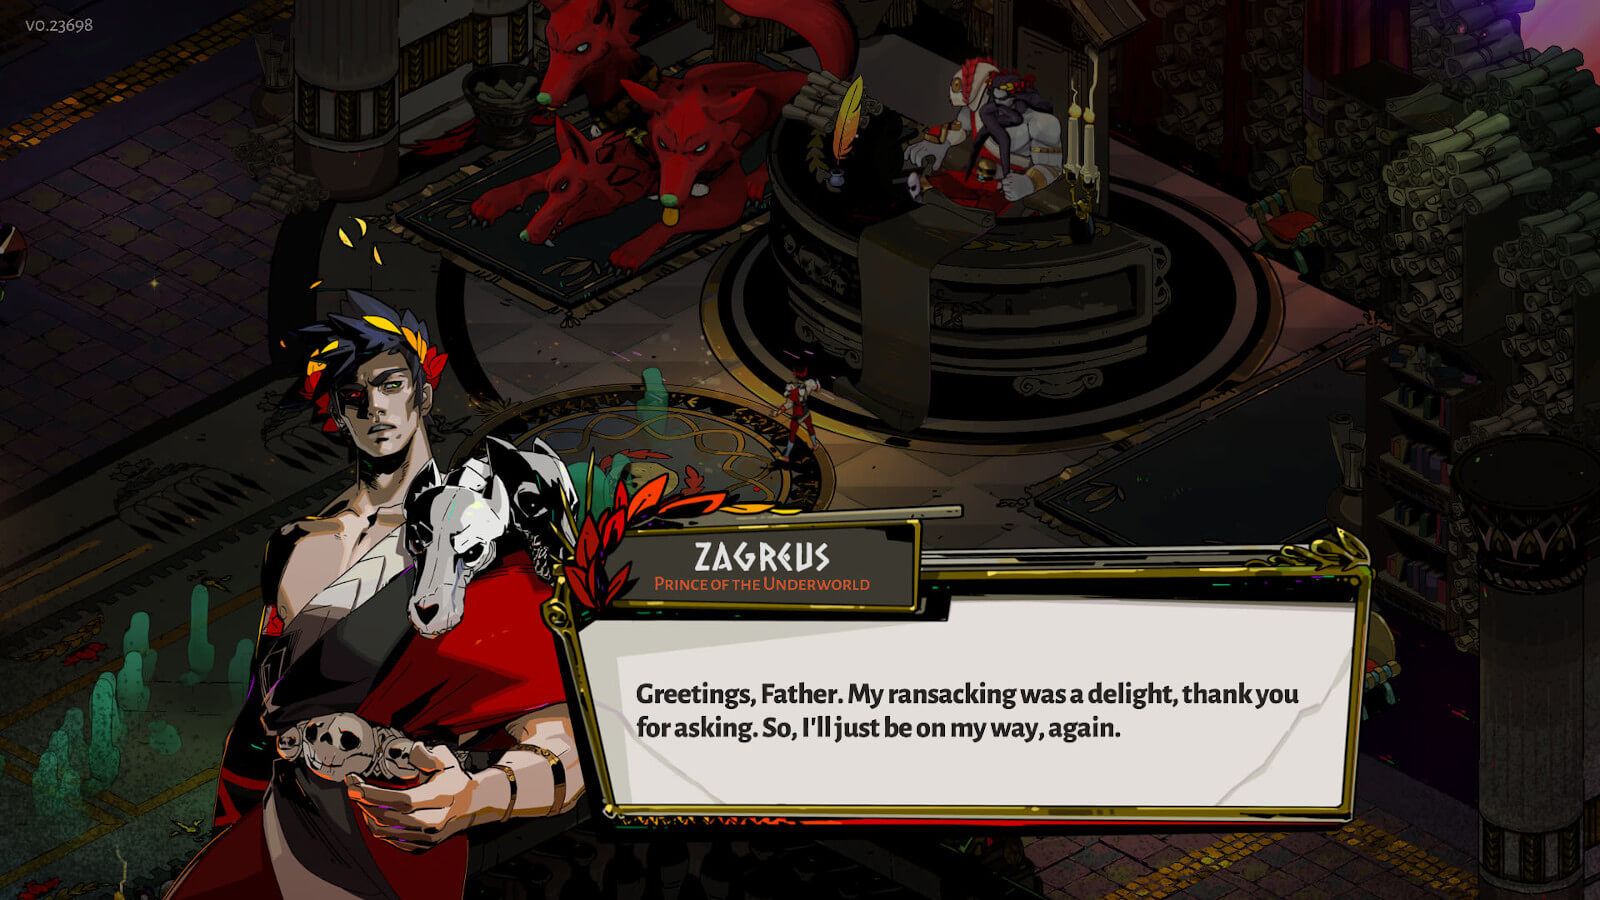 Screenshot of the character Zagreus speaking in the game Hades.